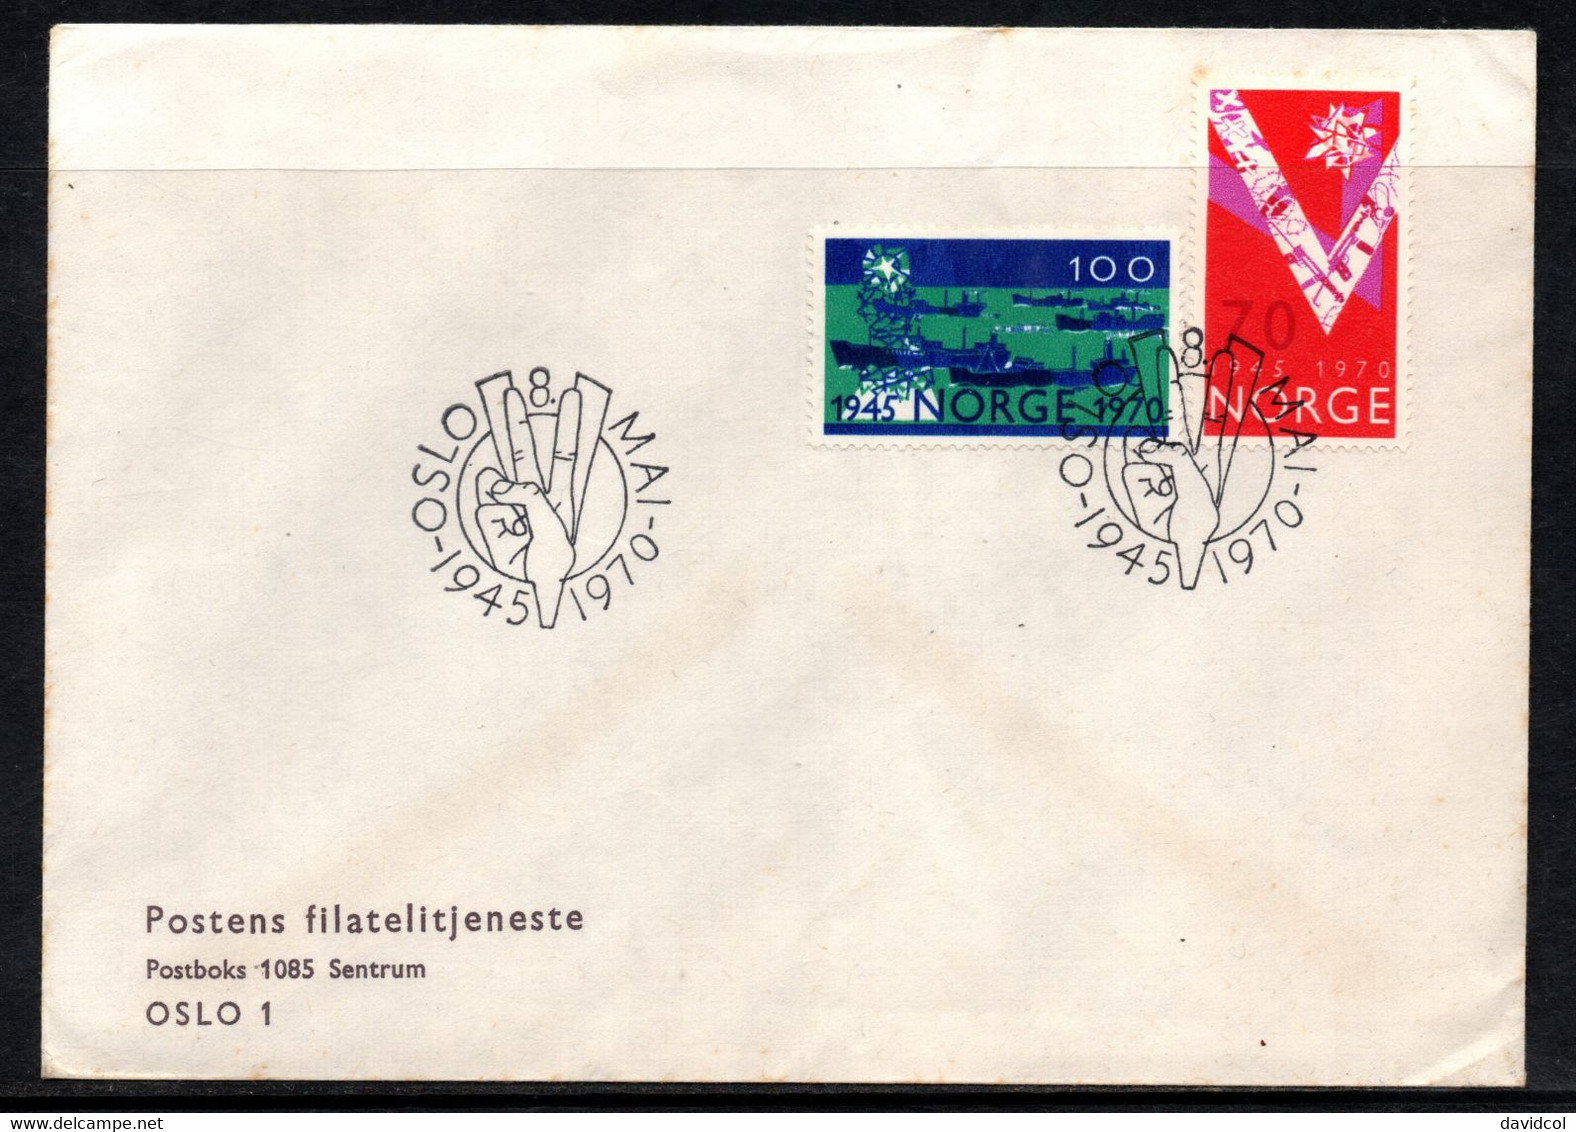 CA190- COVERAUCTION!!! - NORWAY 1970 - OSLO 8-5-70- NORWAY LIBERATION FROM THE GERMANS, 25TH ANNIVERSARY - Storia Postale